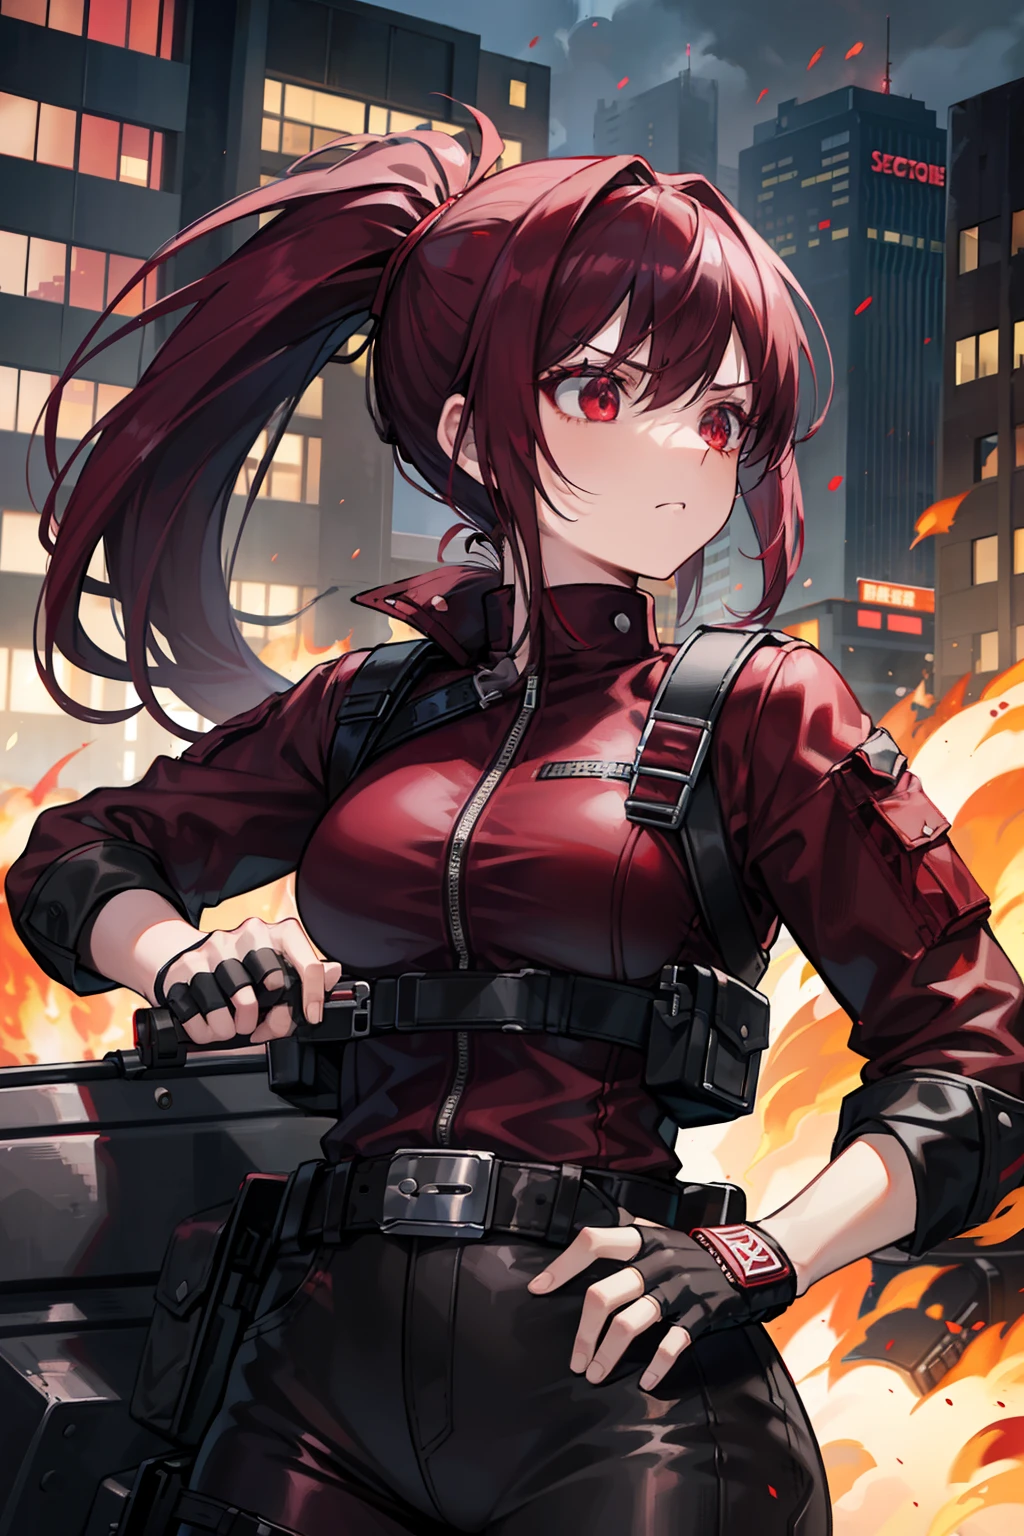 ((Burgundy ponytail)), red eyes, frustrated face, tactical motorcycle outfit, motorcycle, mechanic, fingerless gloves, lush hips, silver belts, silver straps, buckles, guns, machine gun on her back, fire, balls of fire floating around her, in a city with lava